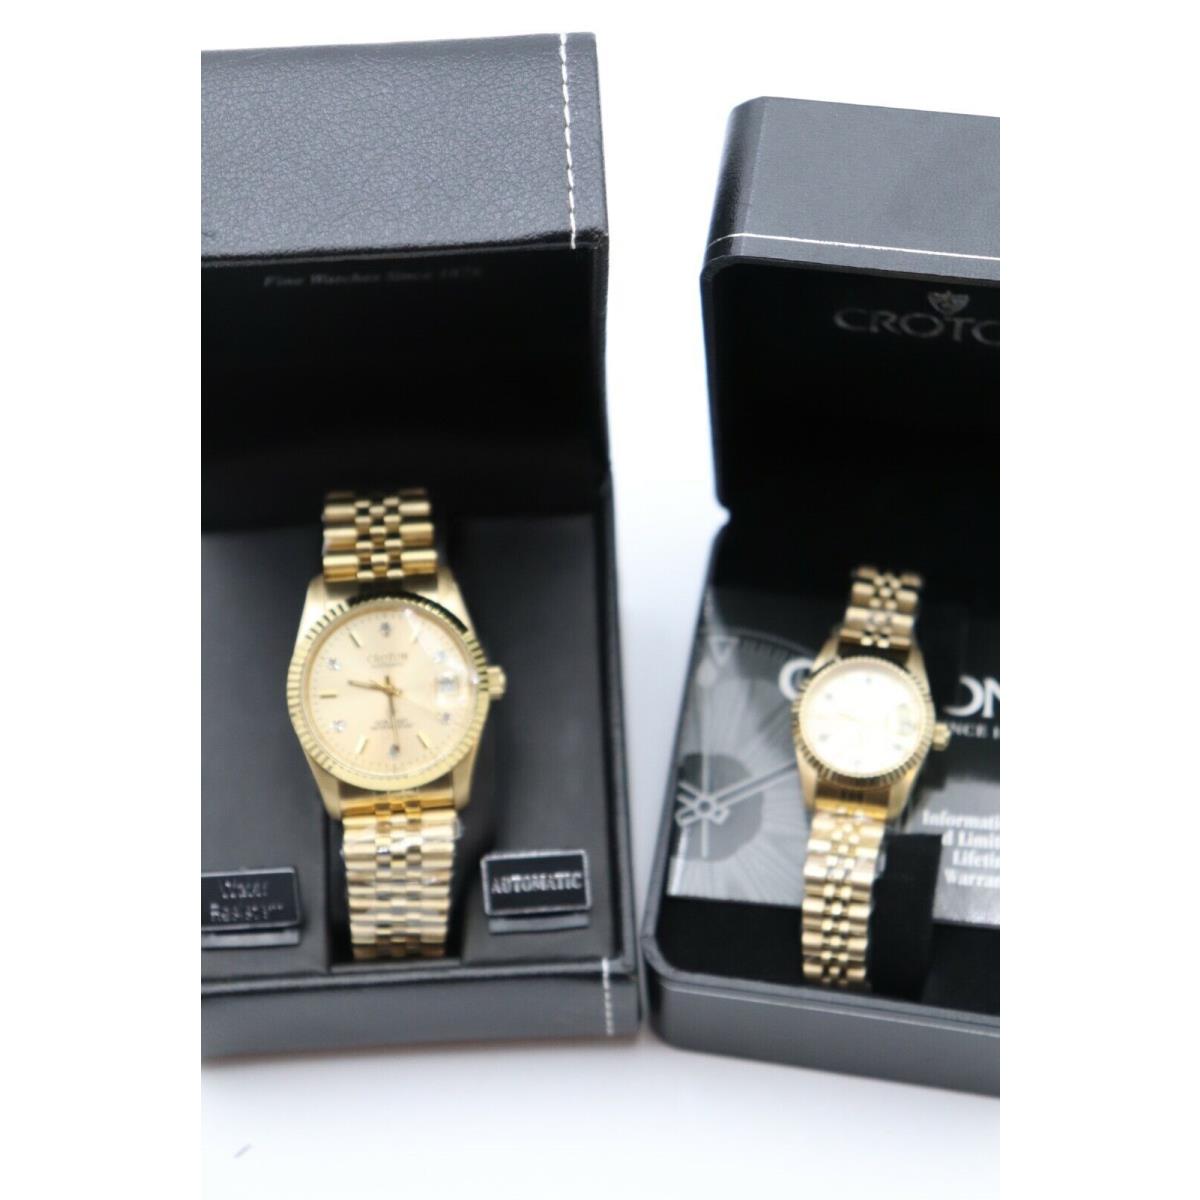 Croton His Hers Diamond Watches Water Resistant Automatic Gold Tone